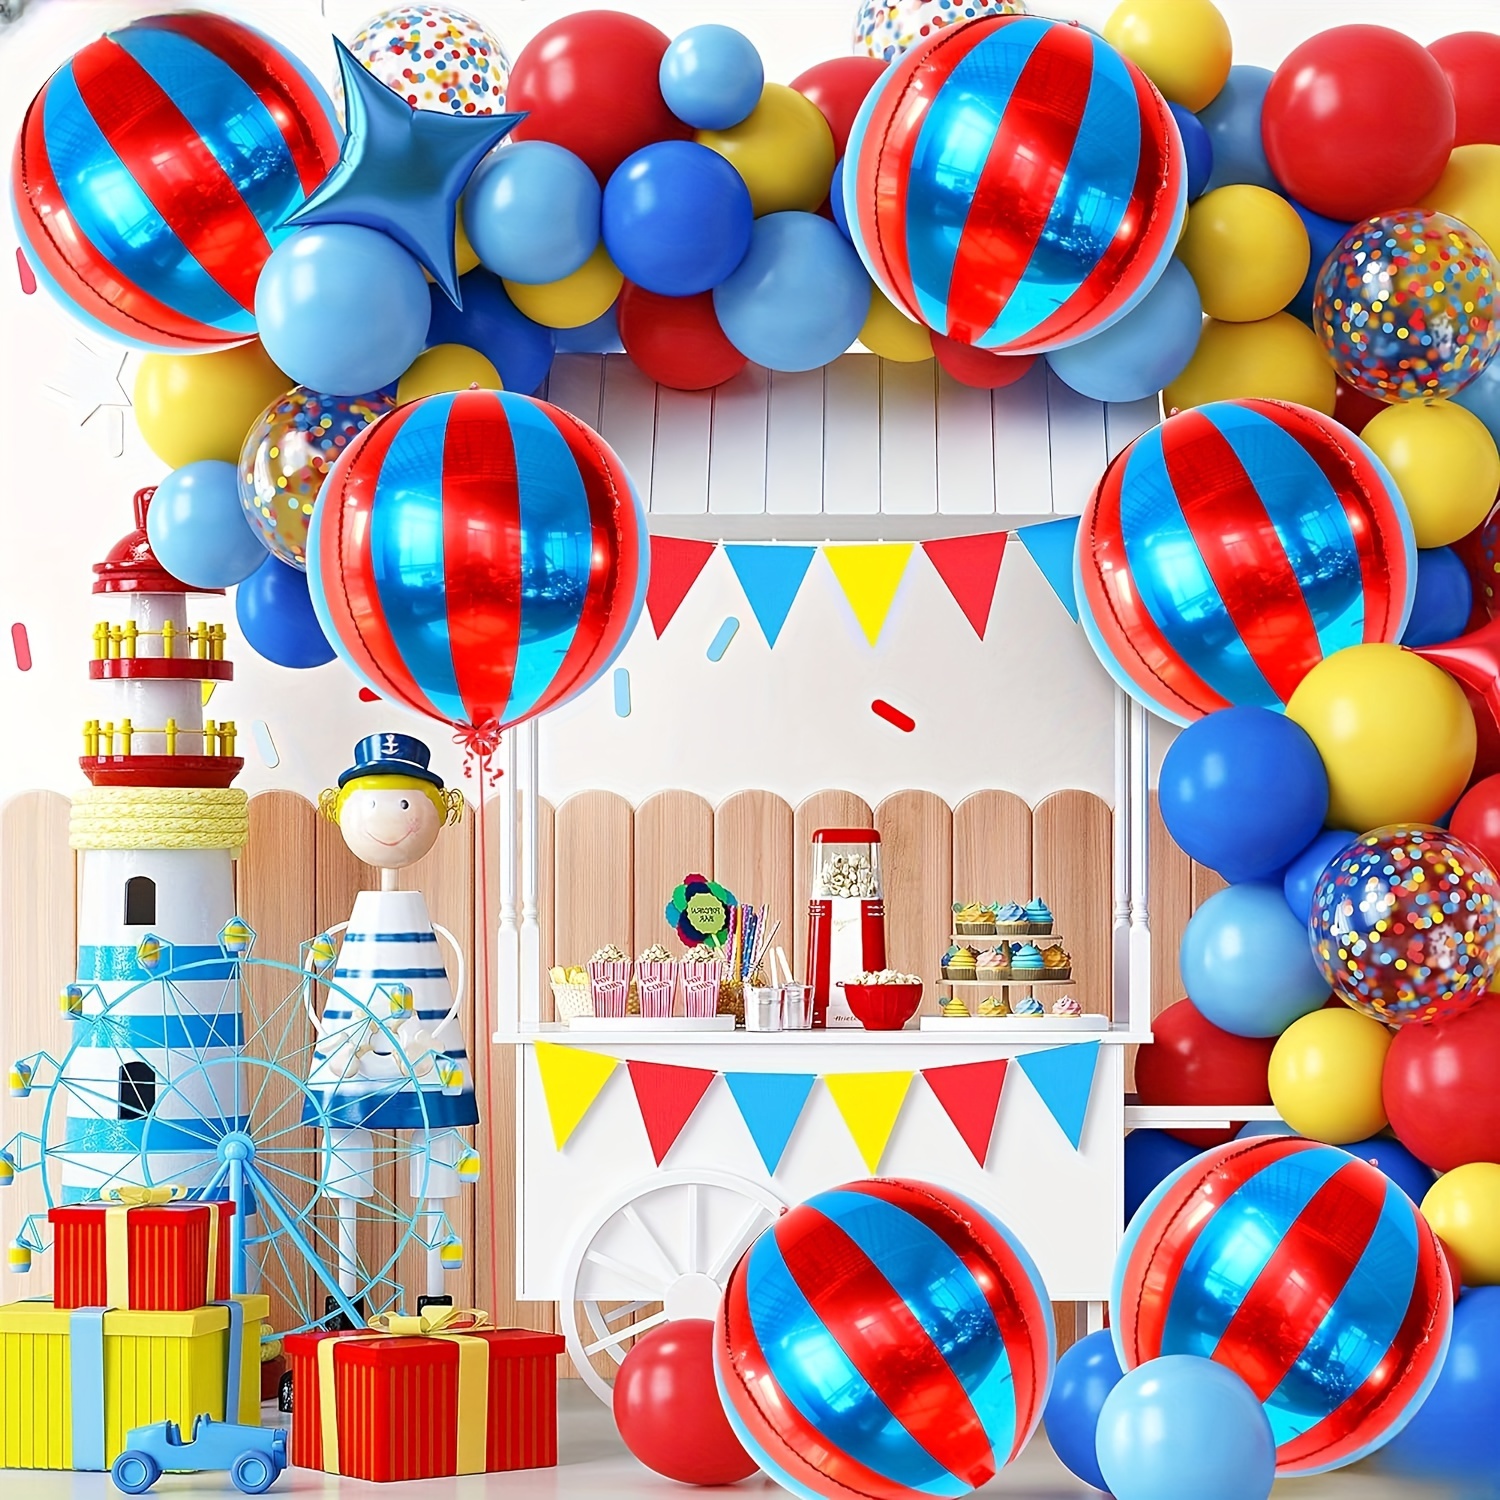 Plim Plim Theme Party Supplies,Plim Plim Birthday Party  Decorations,Includes banners,balloons, Cake toppers for Sofia Theme Kids  Birthday Party